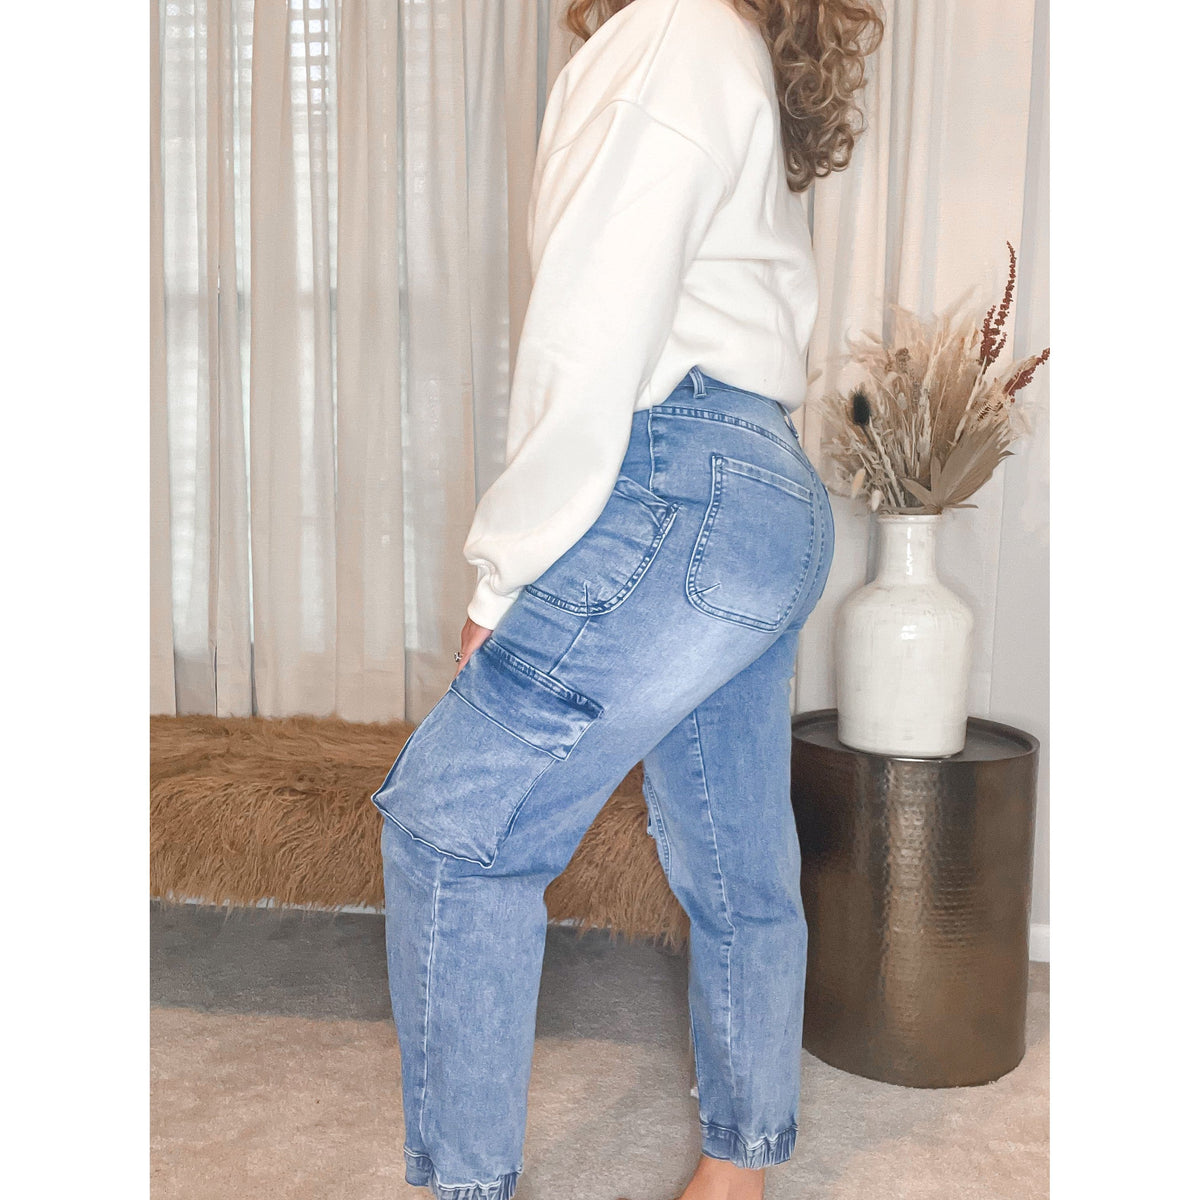 Cally Cargo Denim - The Hive by Chris Jesselle